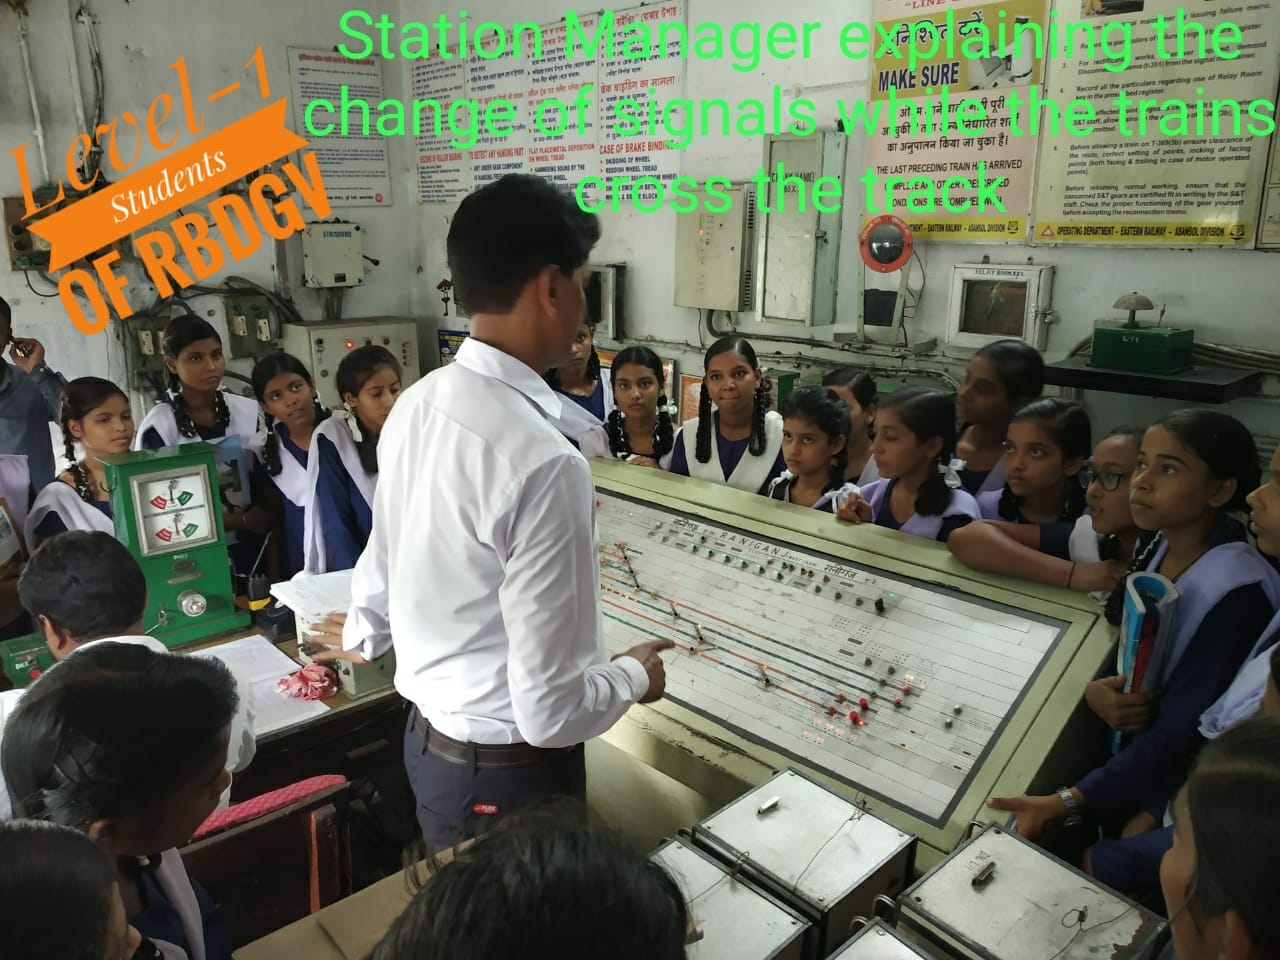 explanation and demonstrations were given by the Station Manager, Manoj Kumar Singh